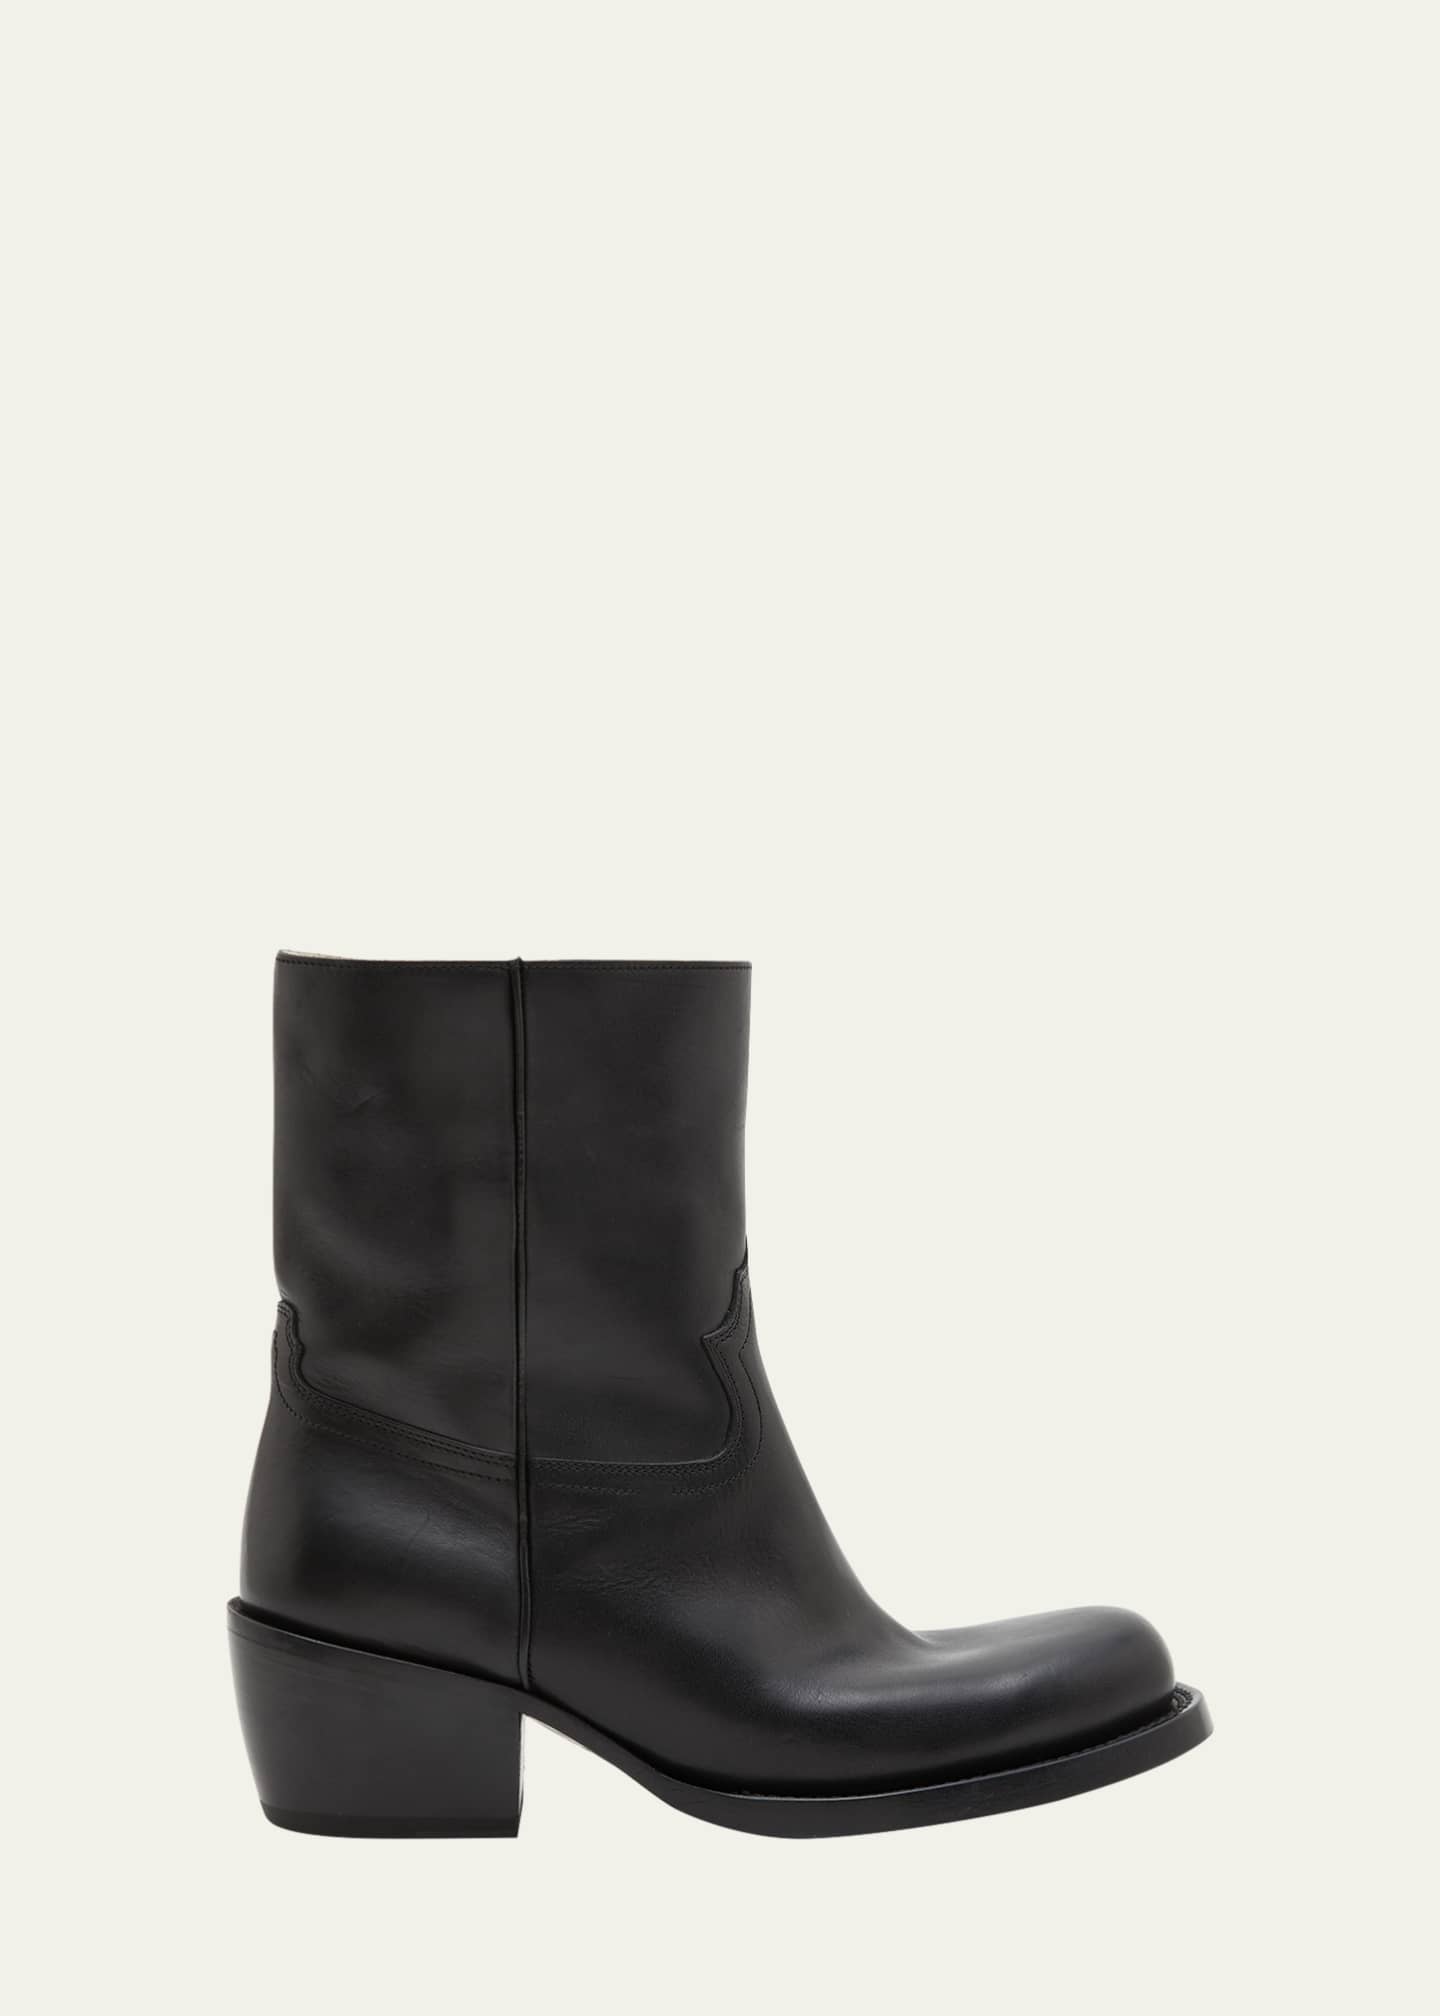 Dries Van Noten Men's Shearling-Lined Leather Western Boots